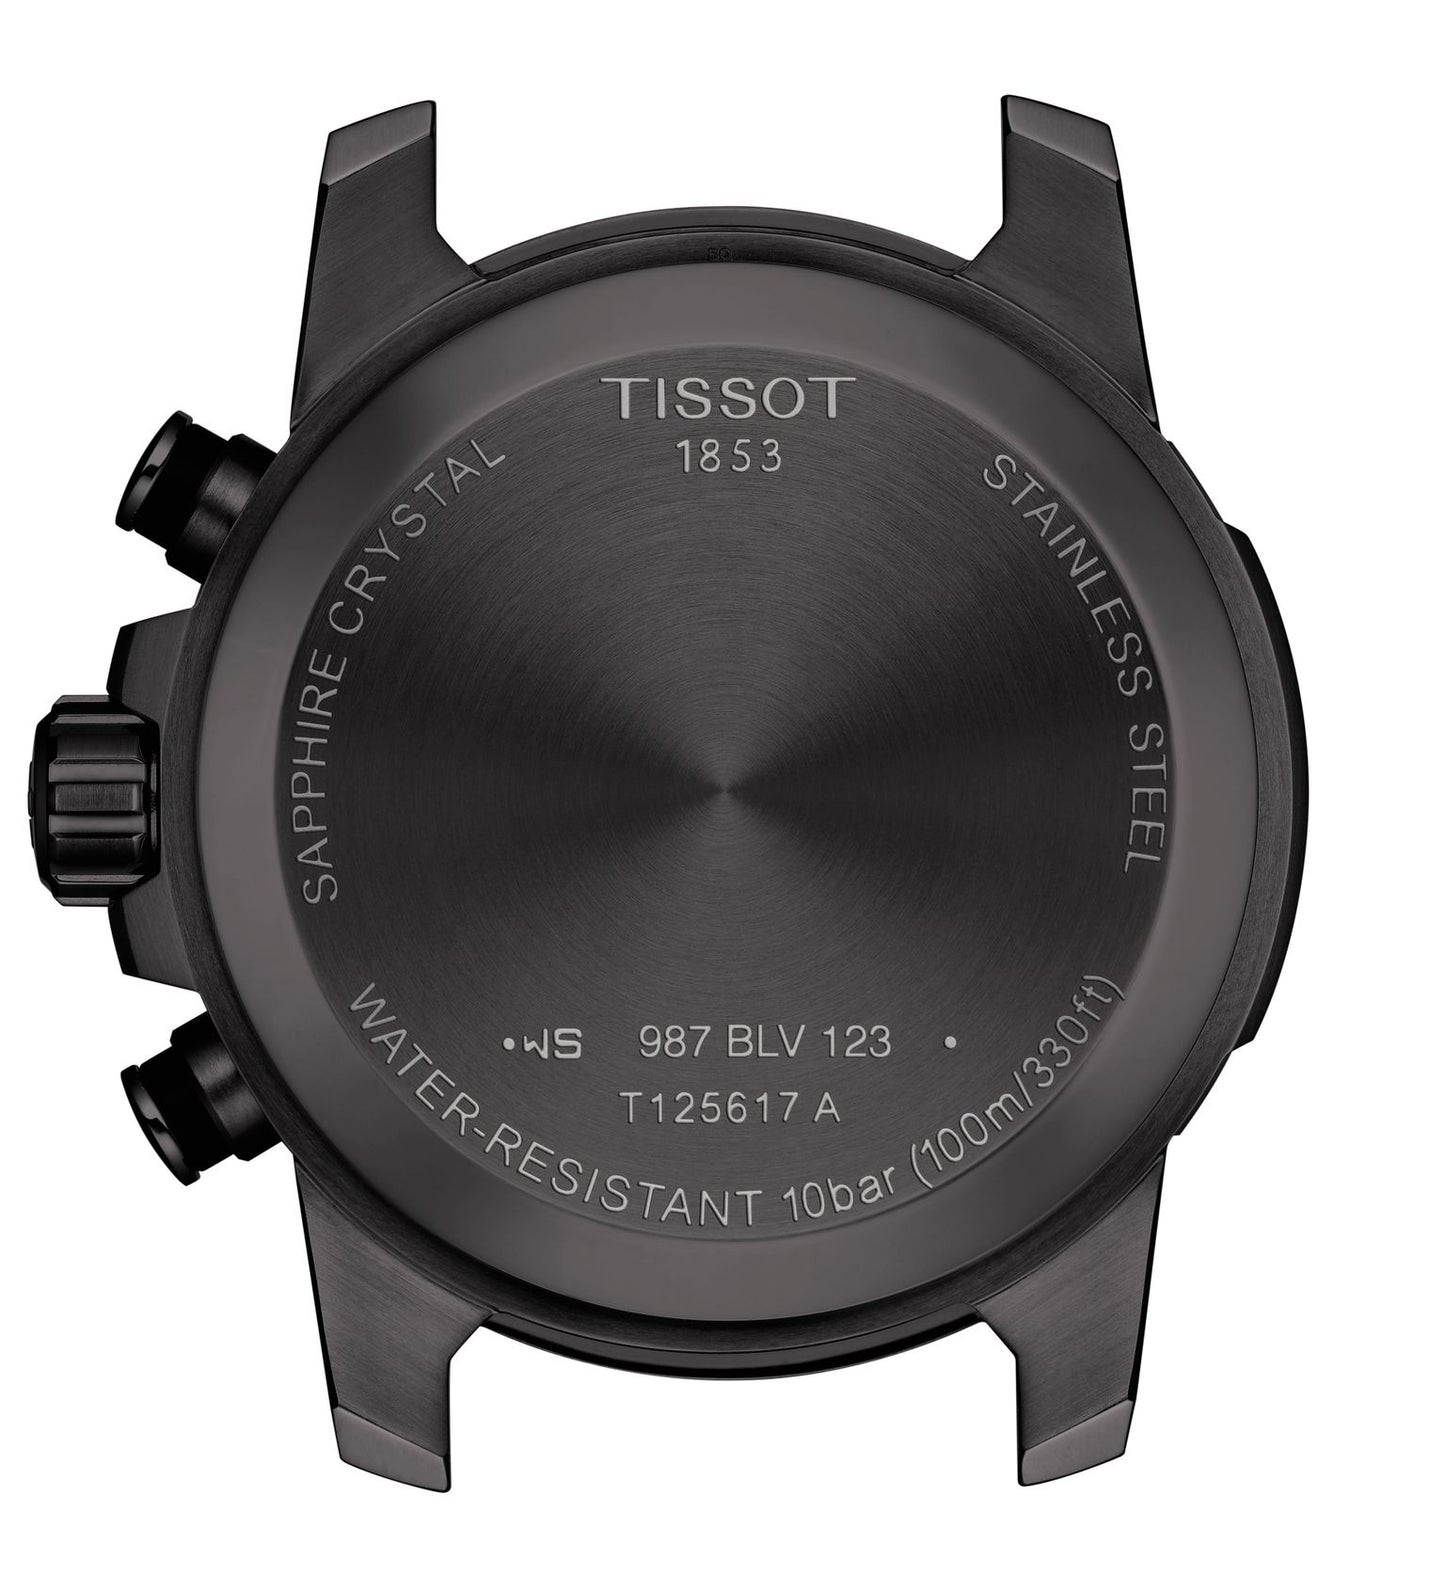 Tissot Supersport Chrono - Black with Brown Leather Strap